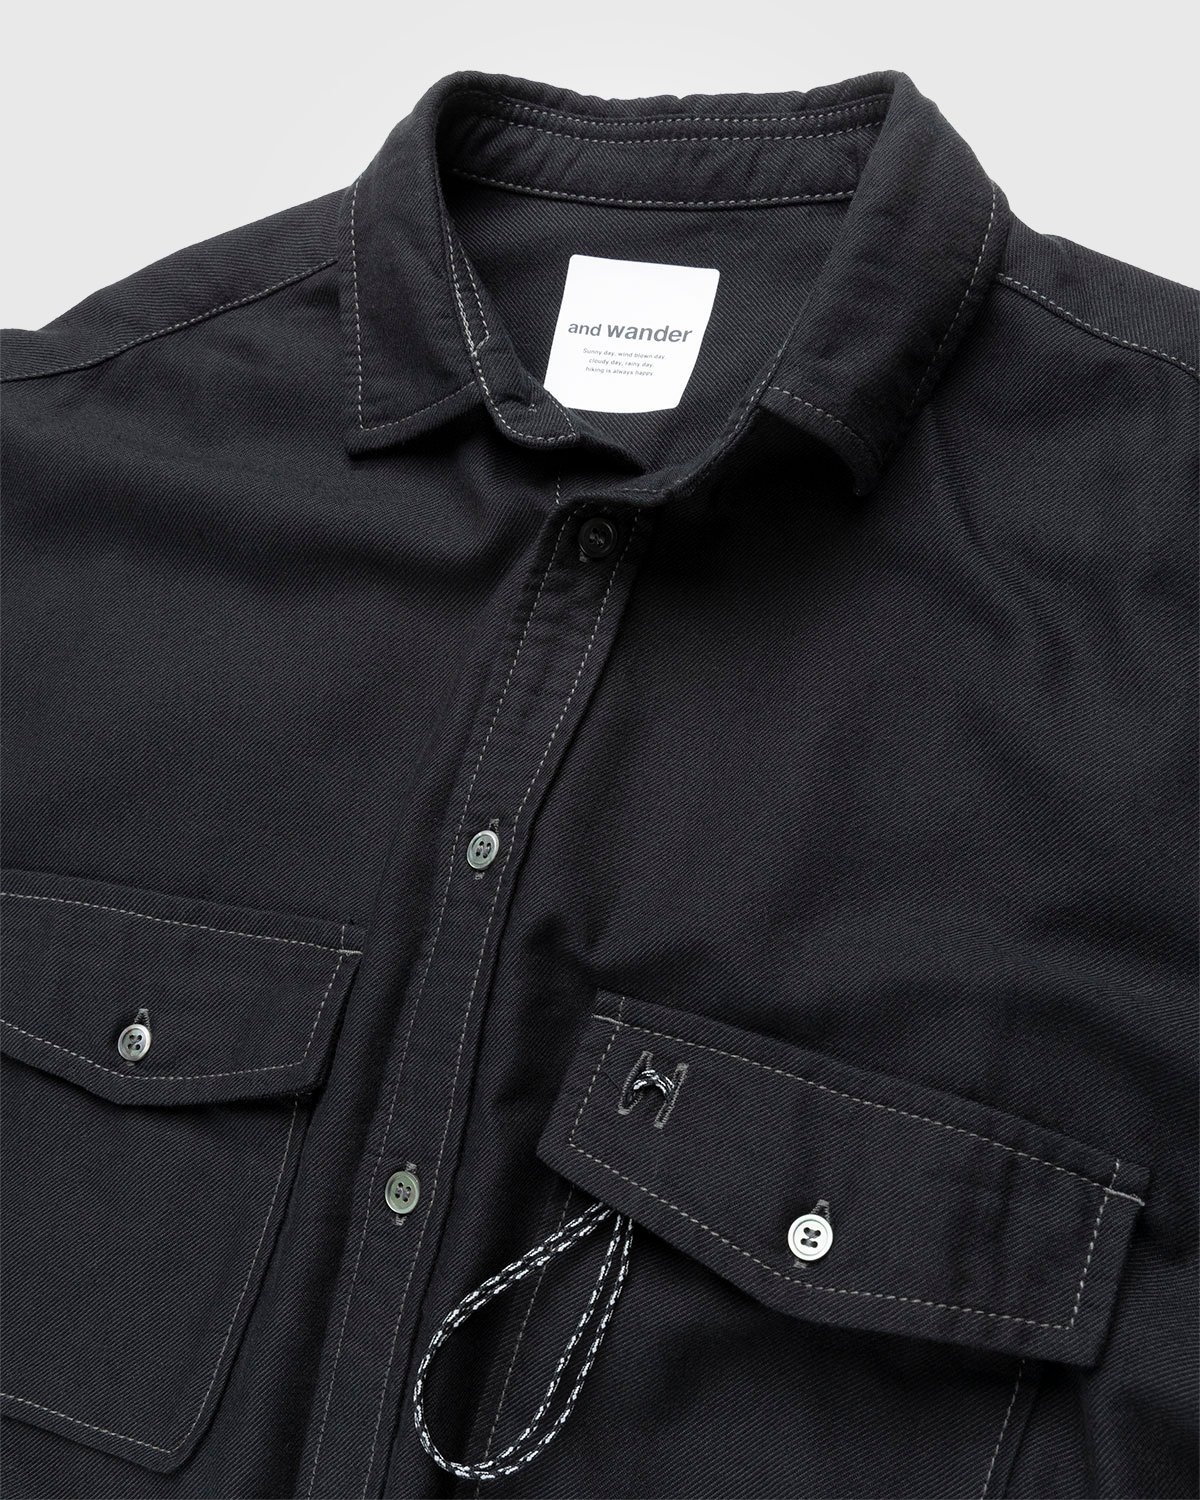 And Wander – Thermonel Pullover Shirt (M) Black - Outerwear - Black - Image 4